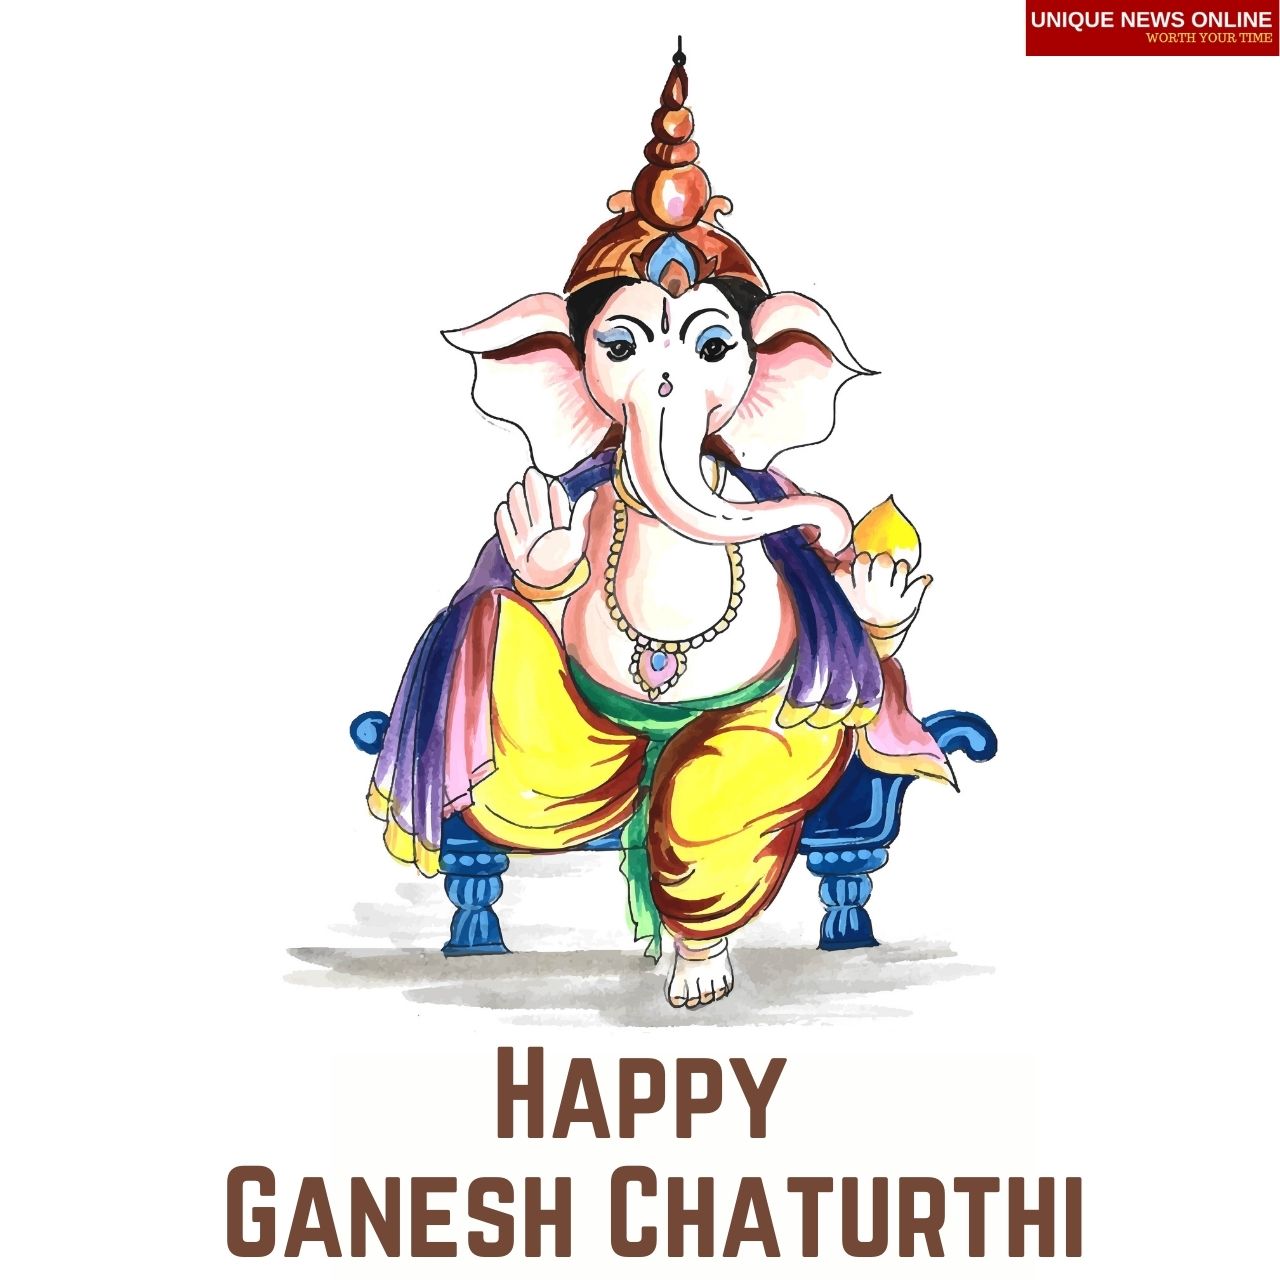 Ganesh Chaturthi 2021 Wishes Quotes Hd Images And Sms For Friends And Relatives 4274